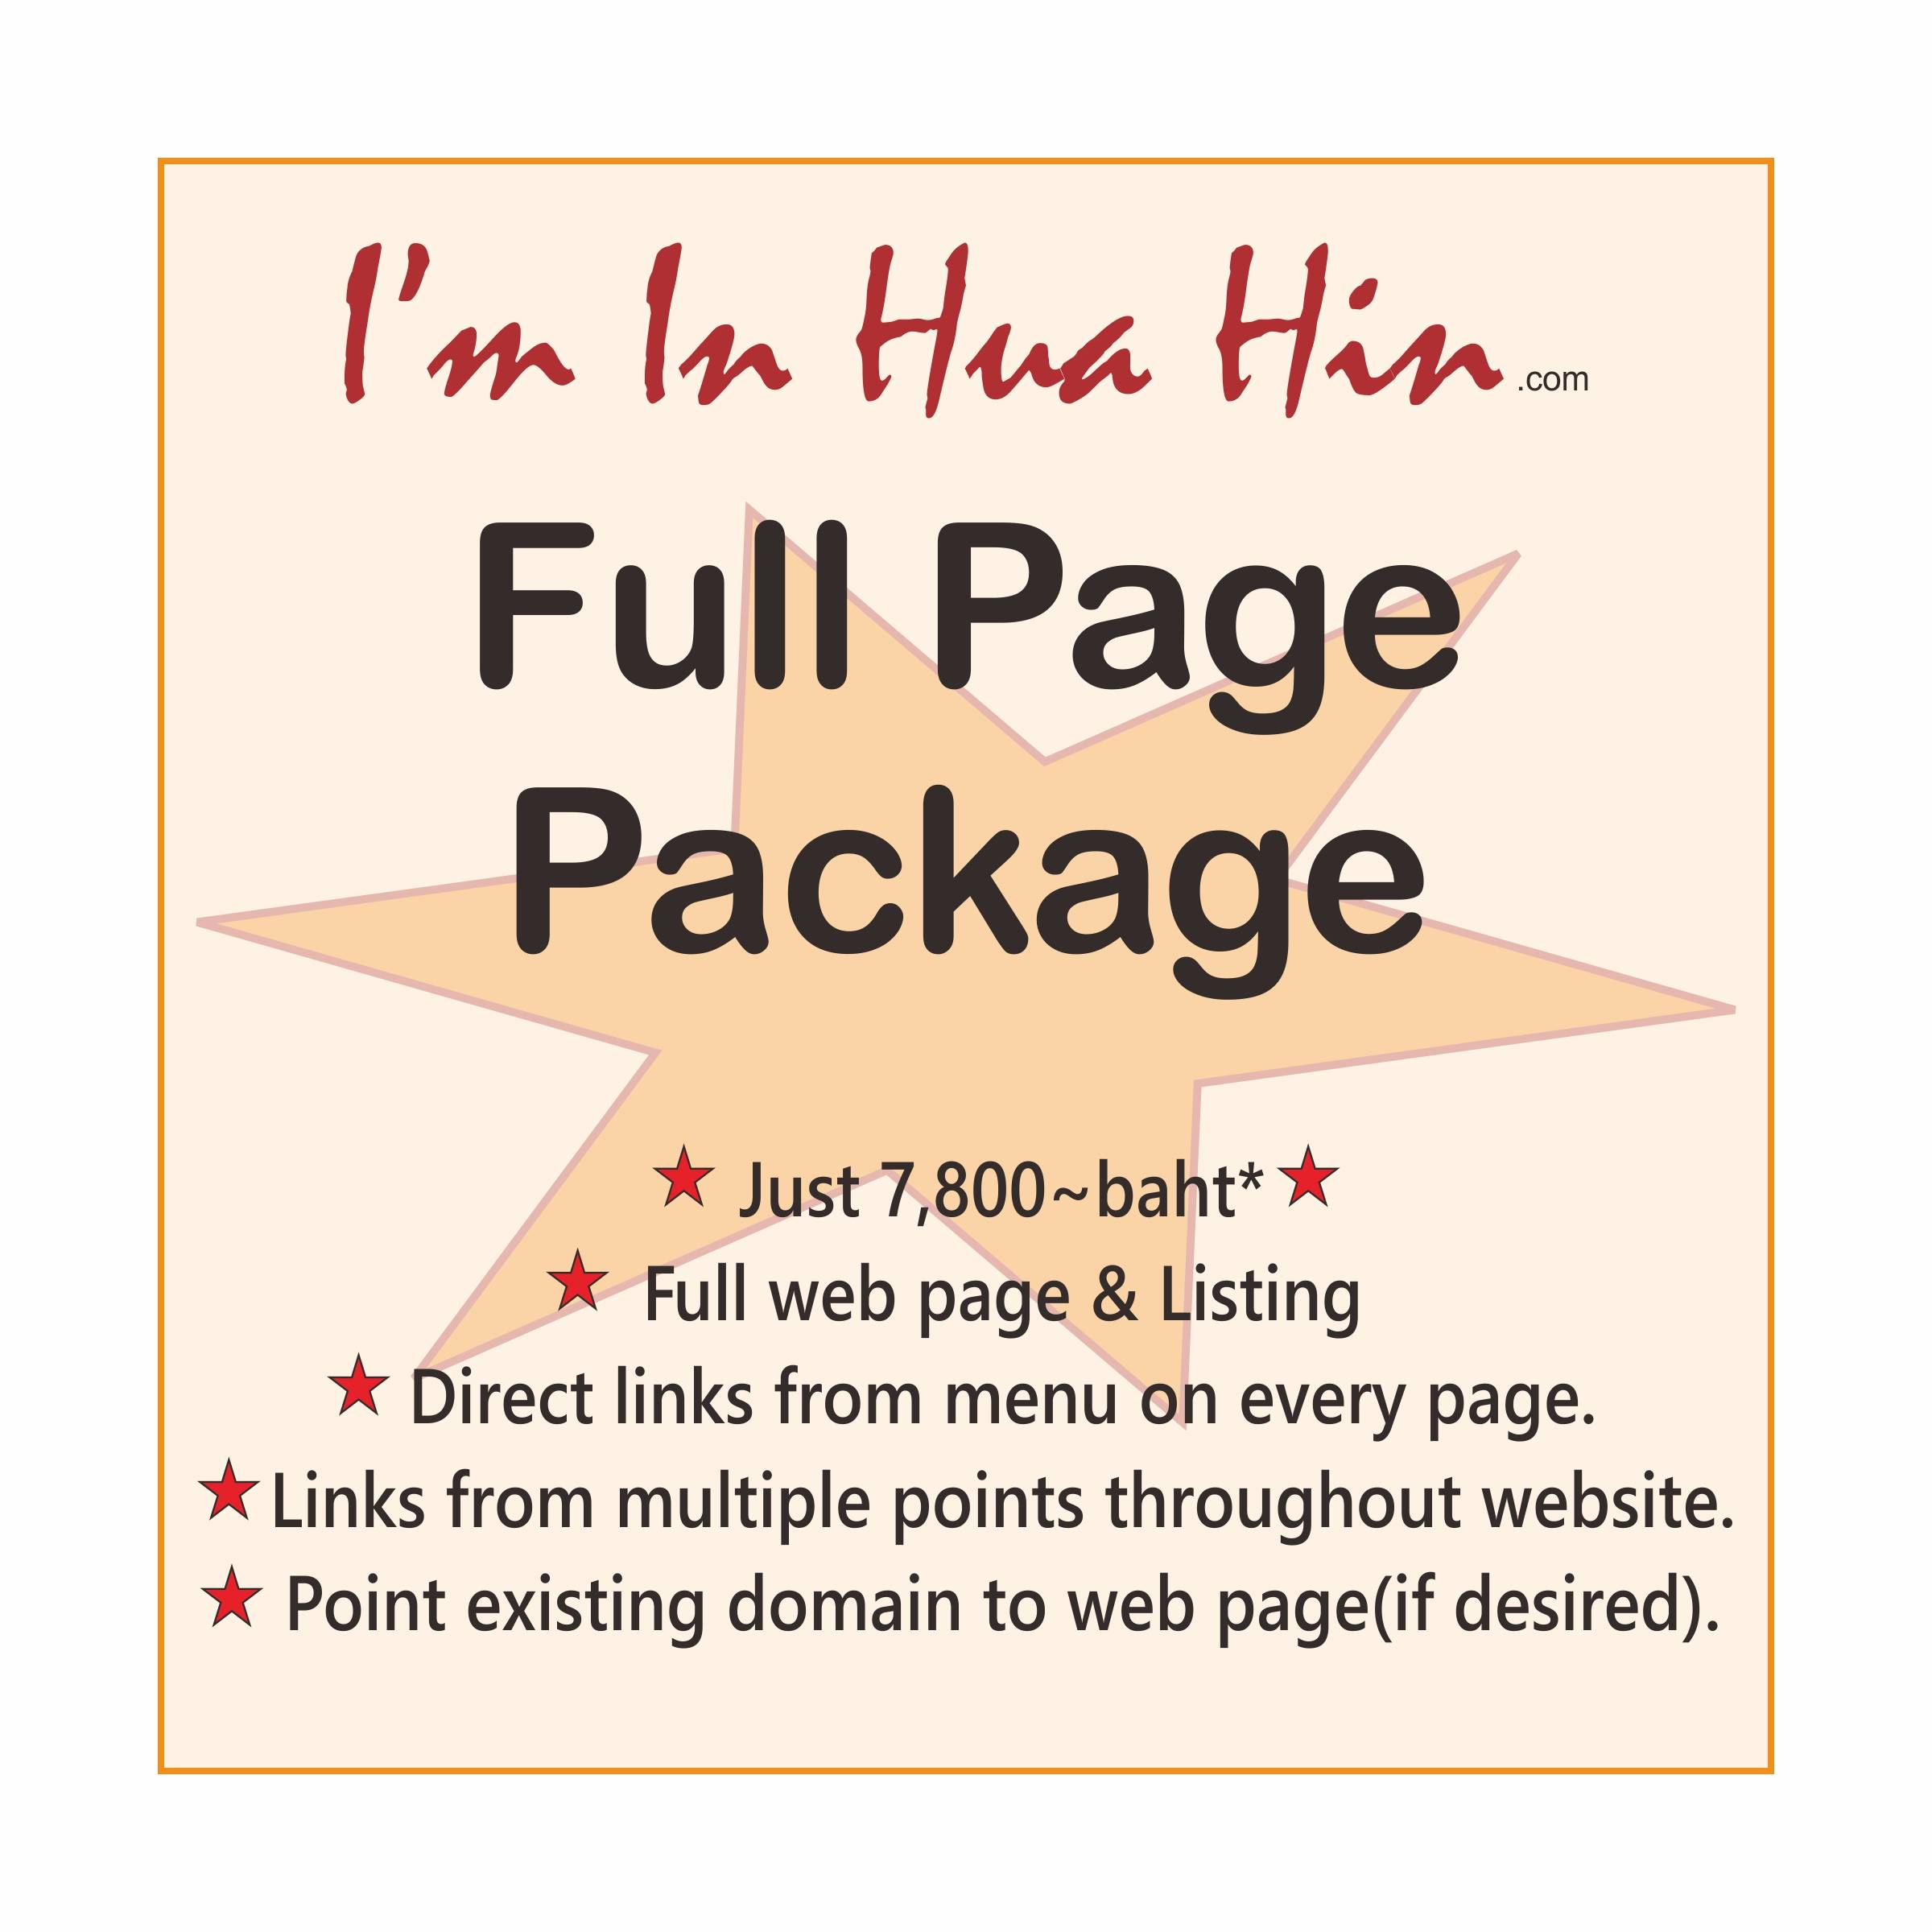 Full page Package